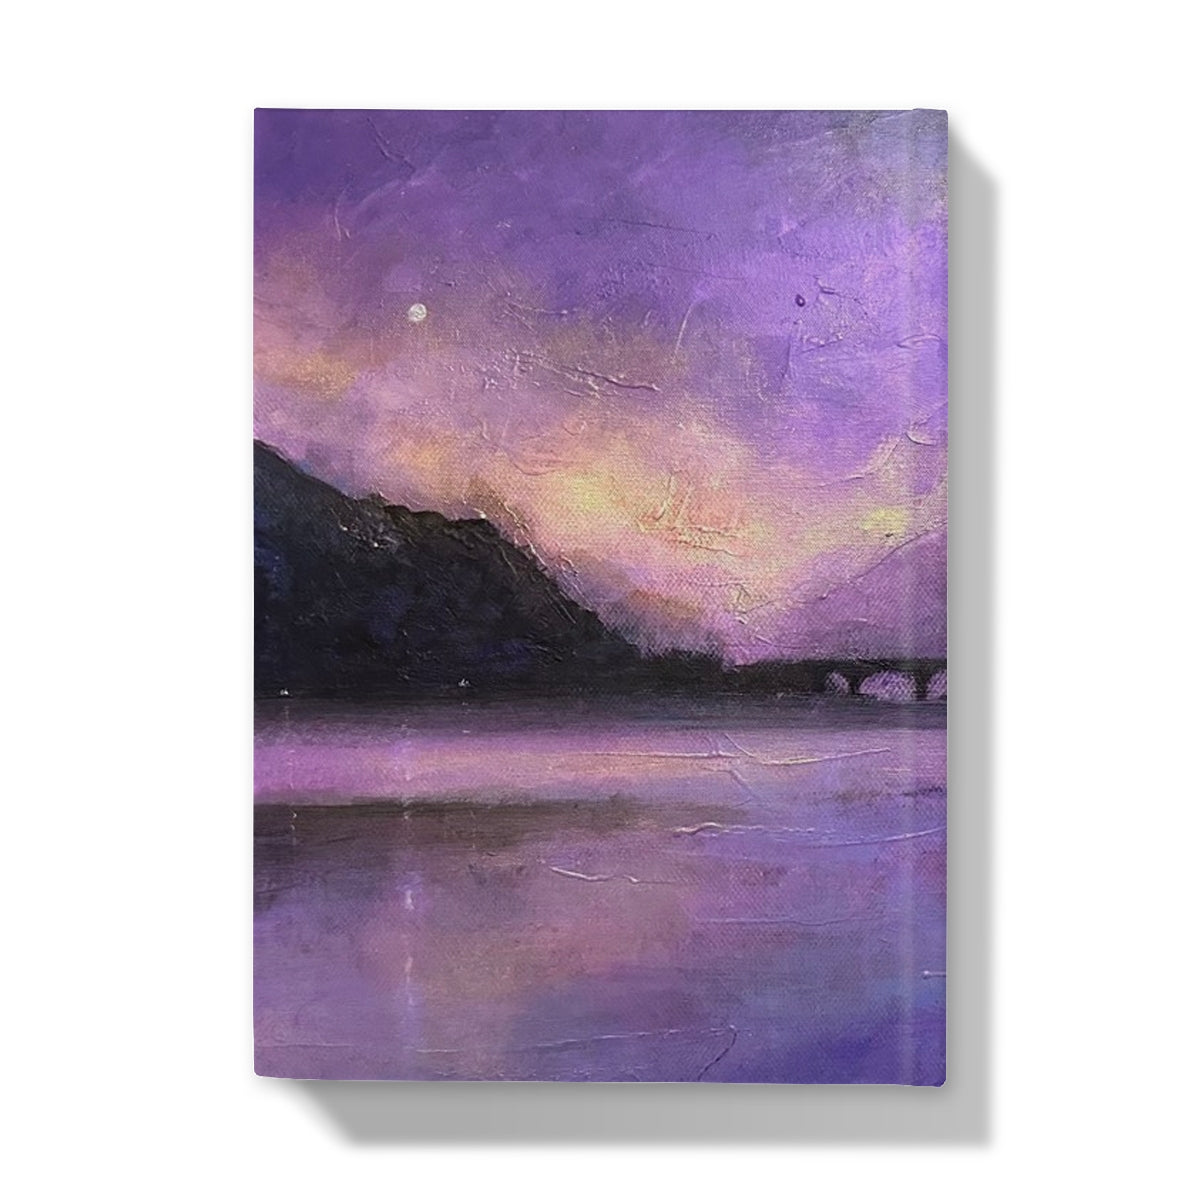 Eilean Donan Castle Moonset Art Gifts Hardback Journal-Journals & Notebooks-Historic & Iconic Scotland Art Gallery-Paintings, Prints, Homeware, Art Gifts From Scotland By Scottish Artist Kevin Hunter